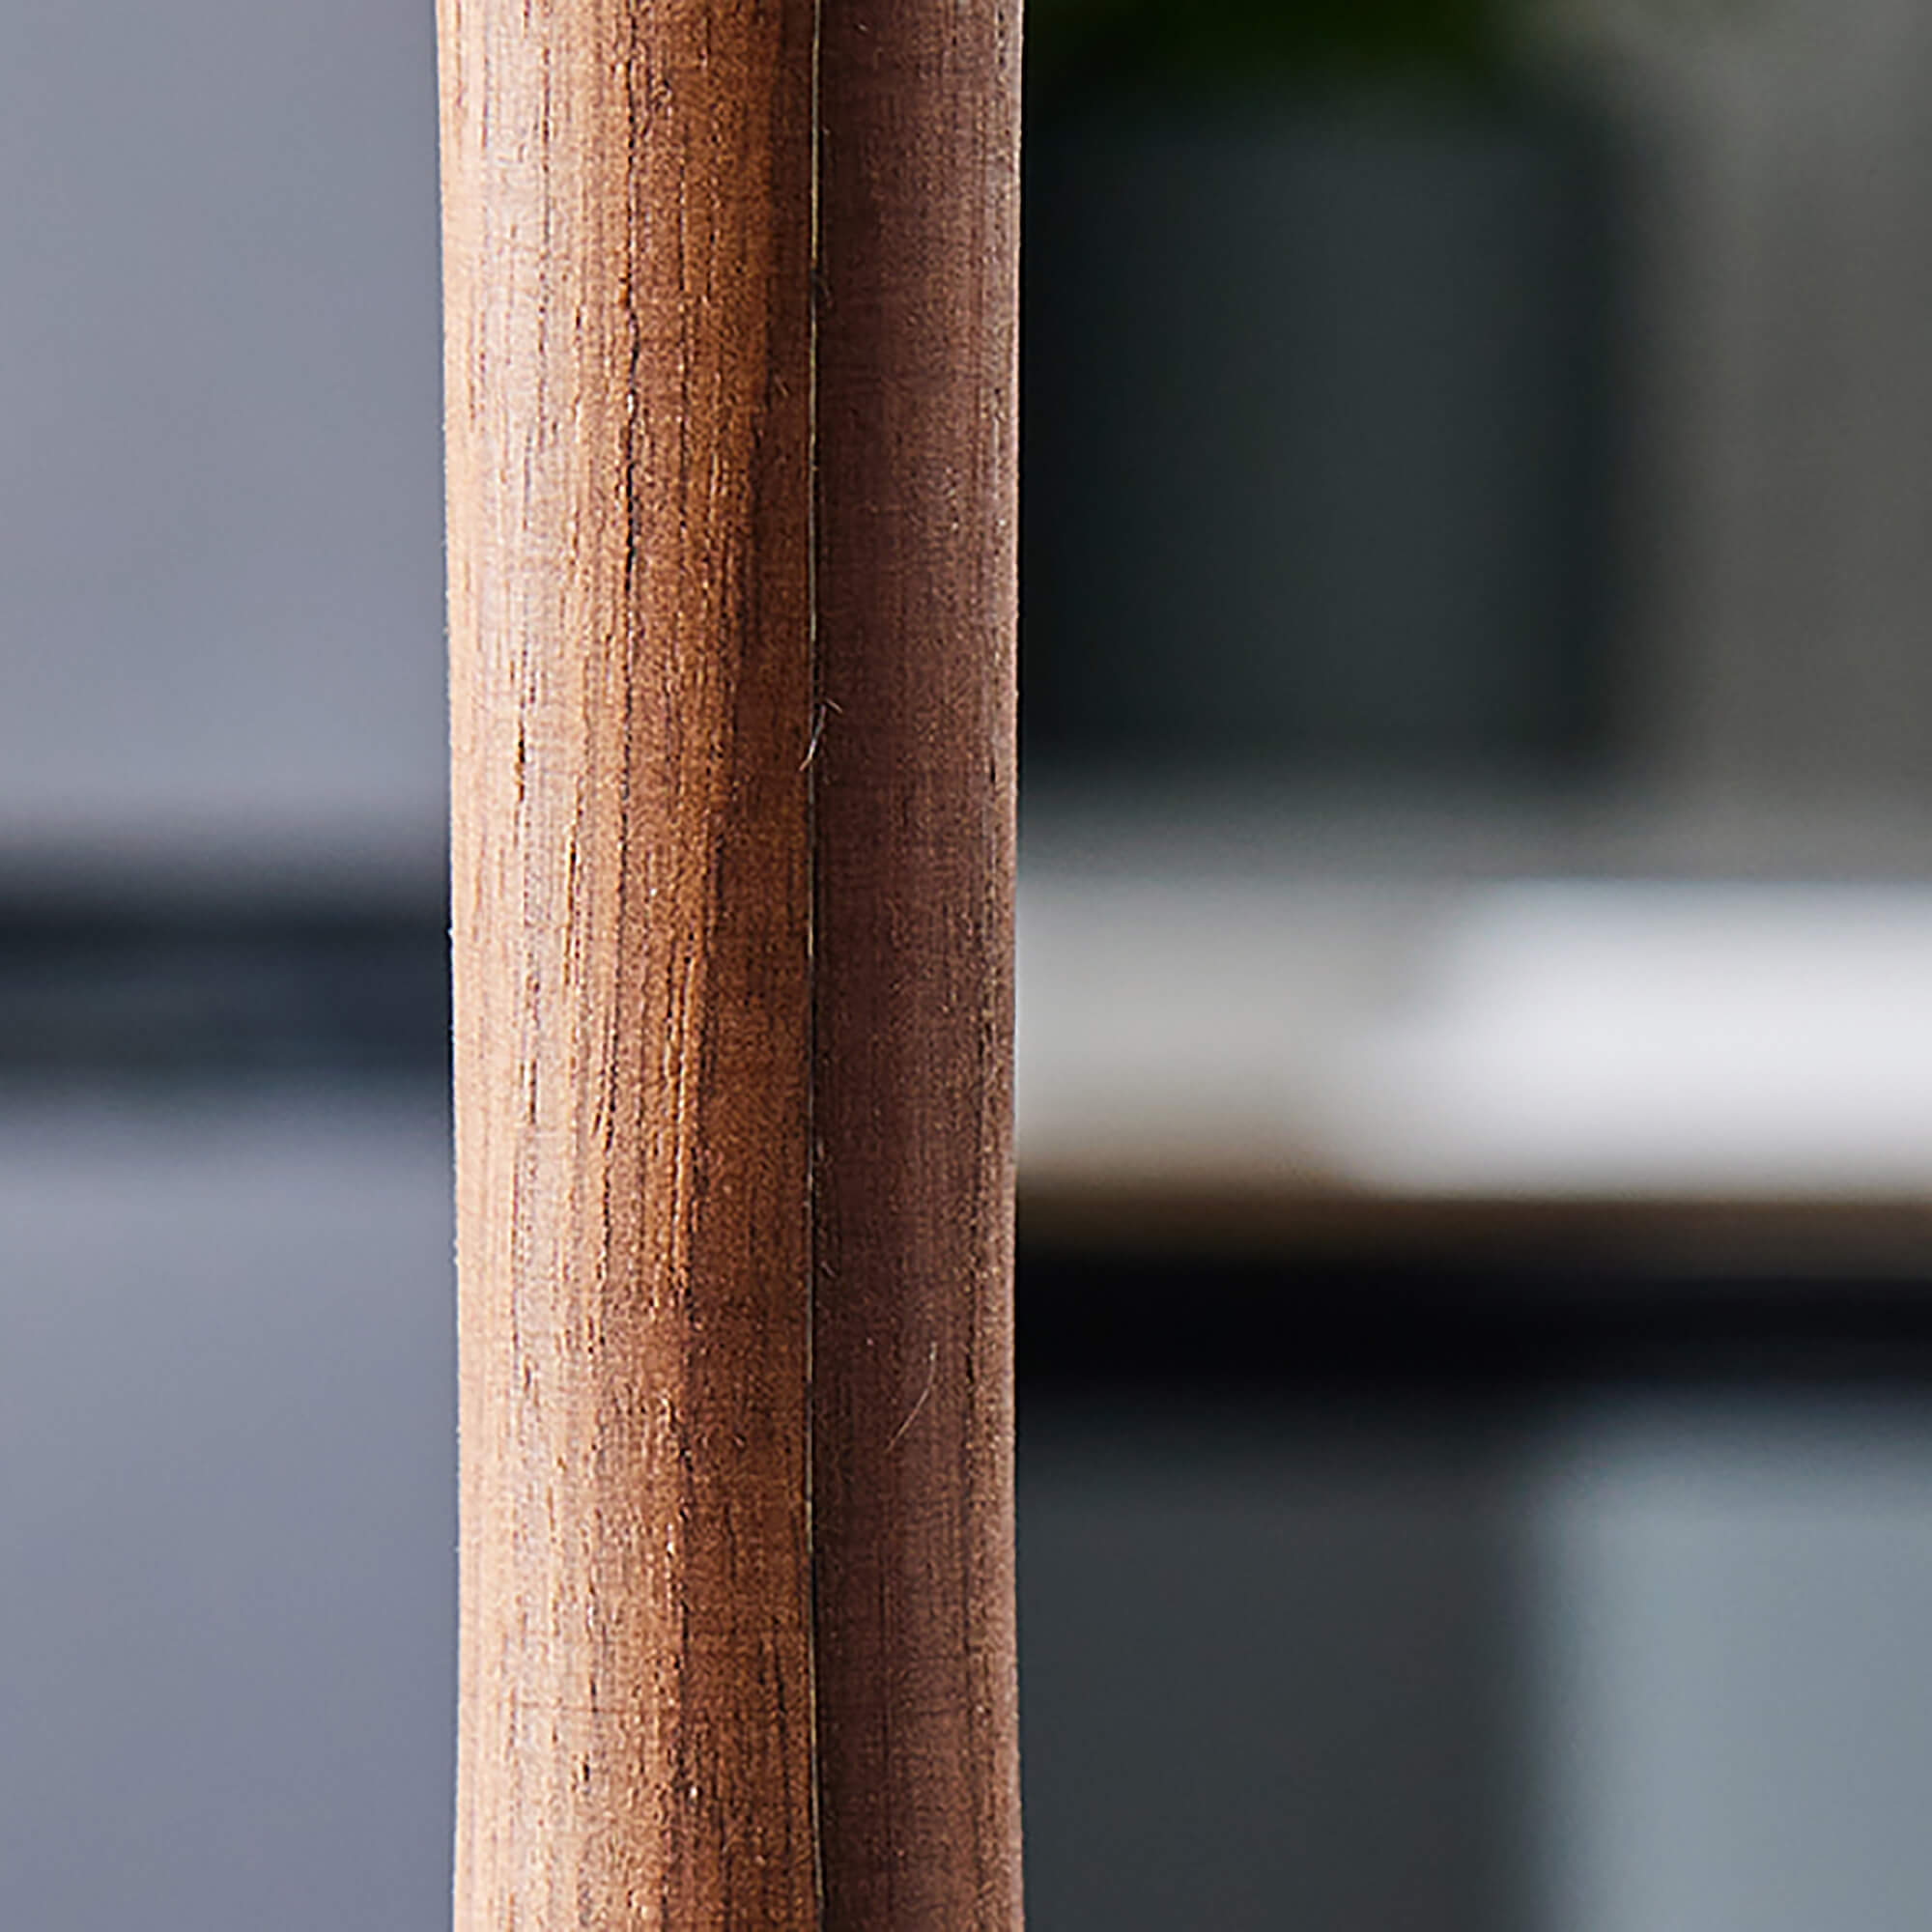 Standing Paper Towel Holder, crafted in Black Walnut and Yellow Birch